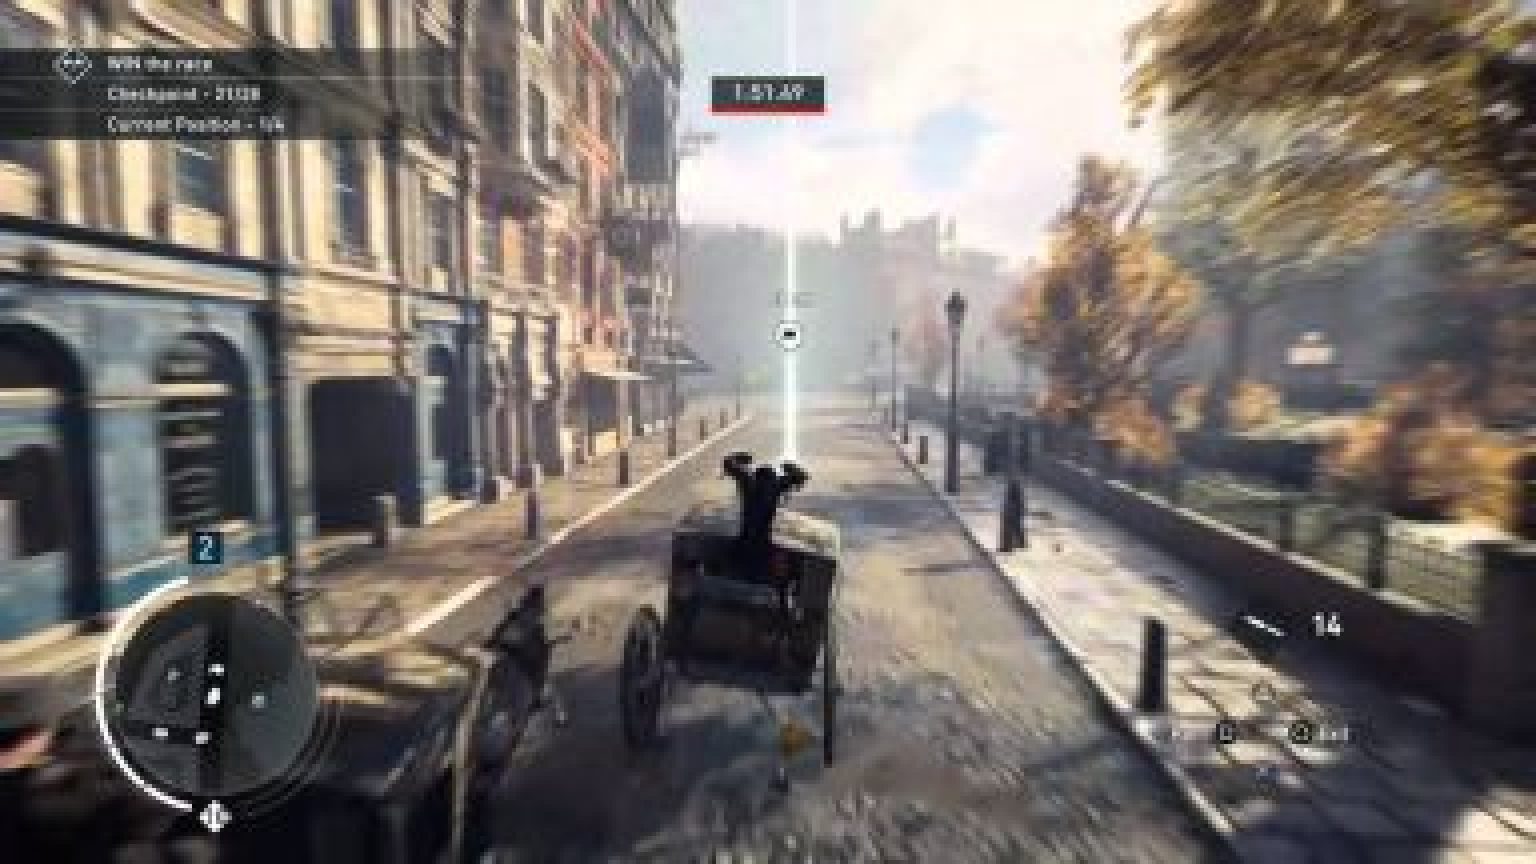 Assassin’s Creed Syndicate Free Download Pc Game Highly Compressed 3